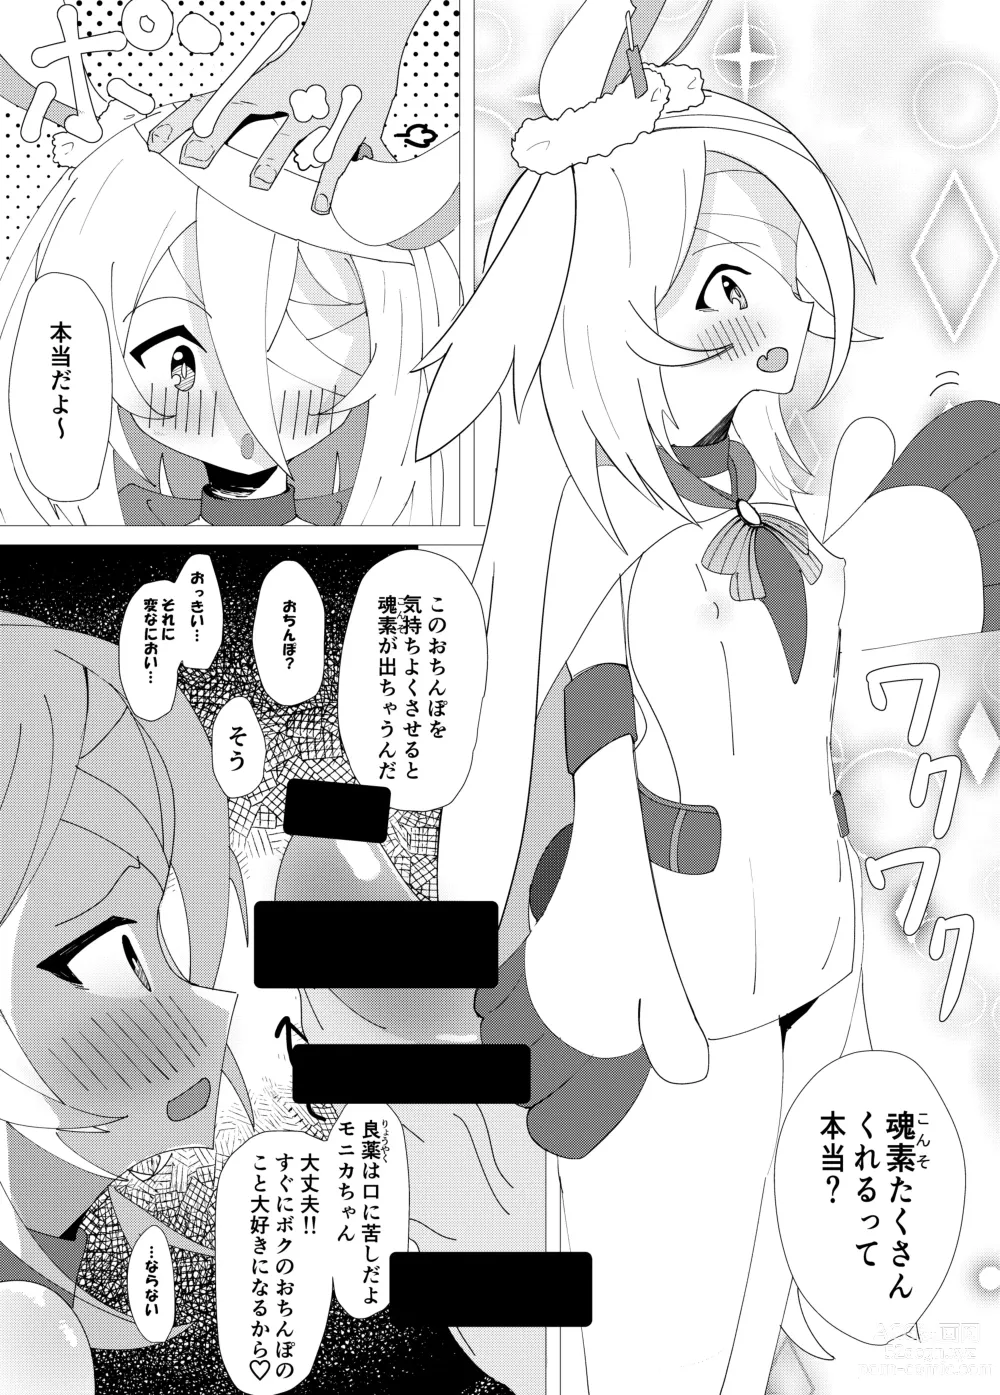 Page 1 of doujinshi 隅々四隅s illustrations - pixiv